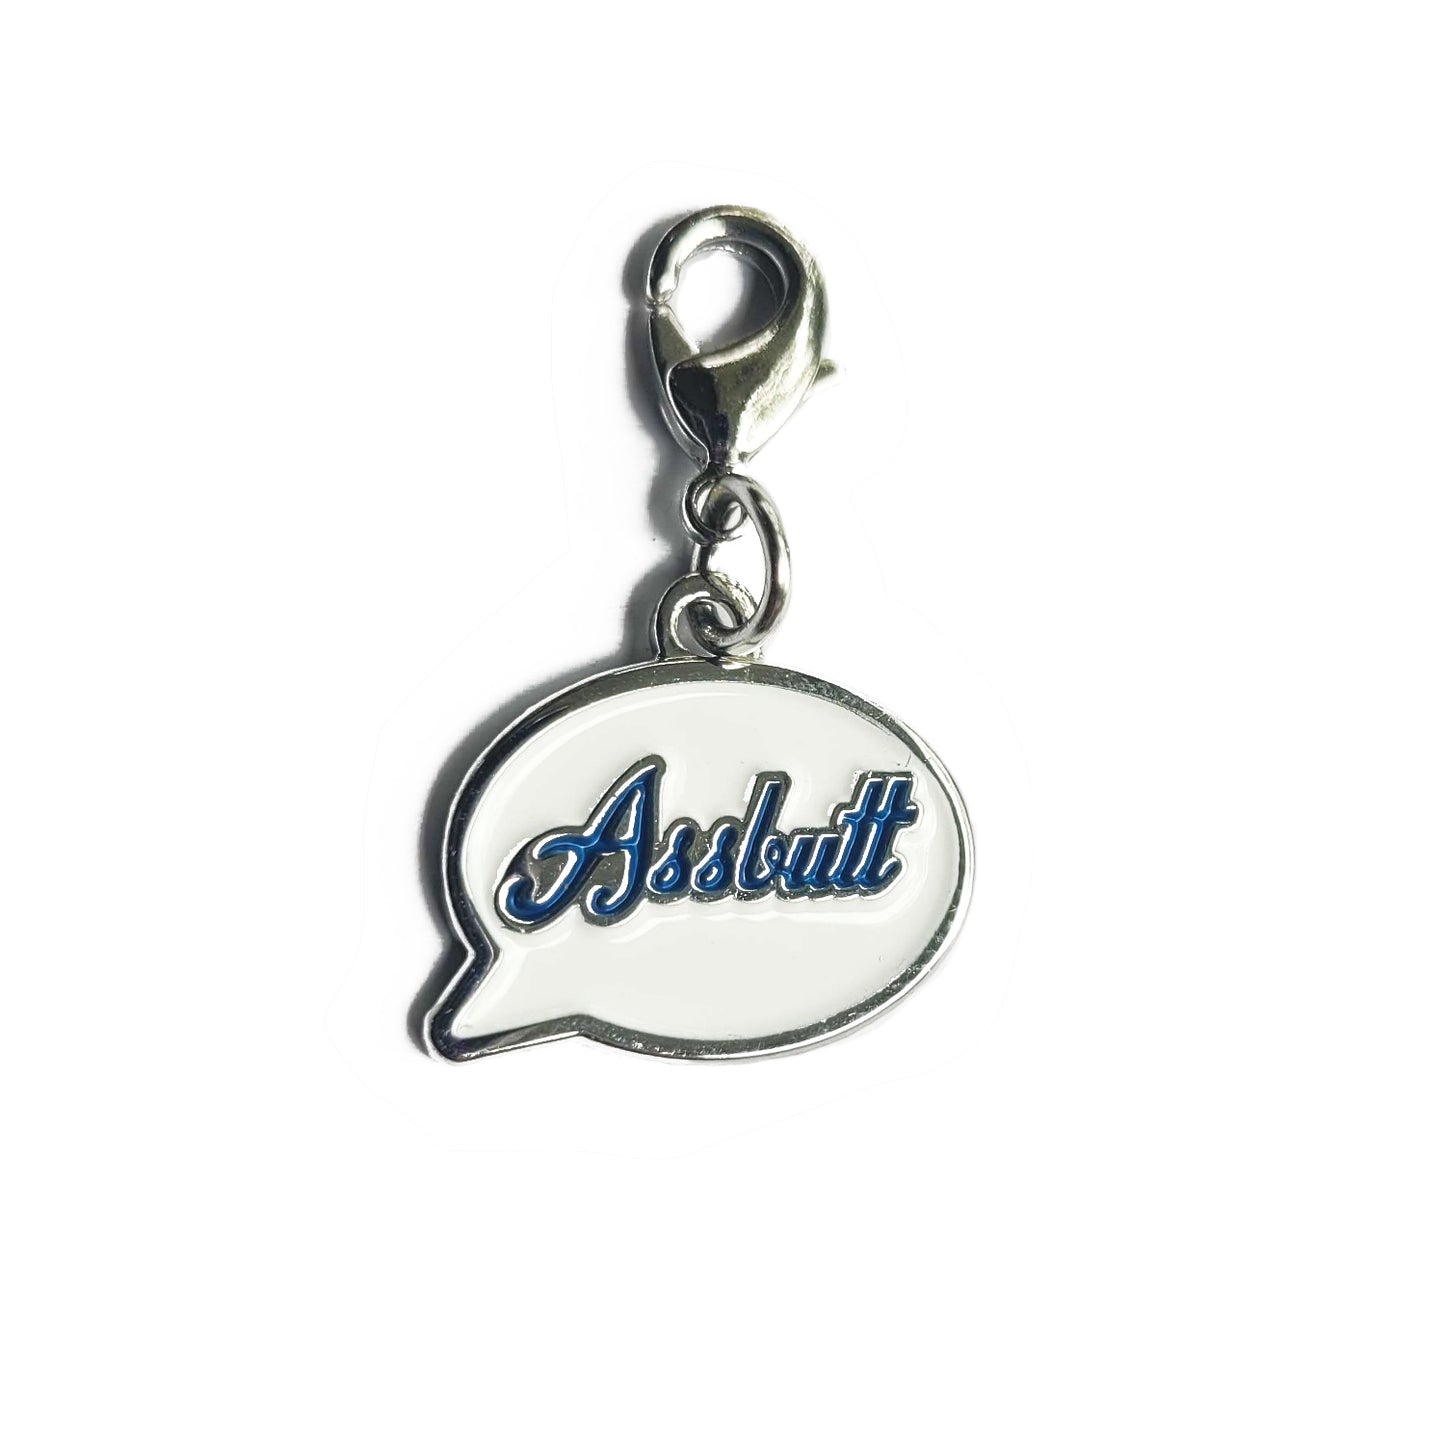 A silver charm with a white front in the shape of a speech bubble. The word "Assbutt" is written in blue script font.